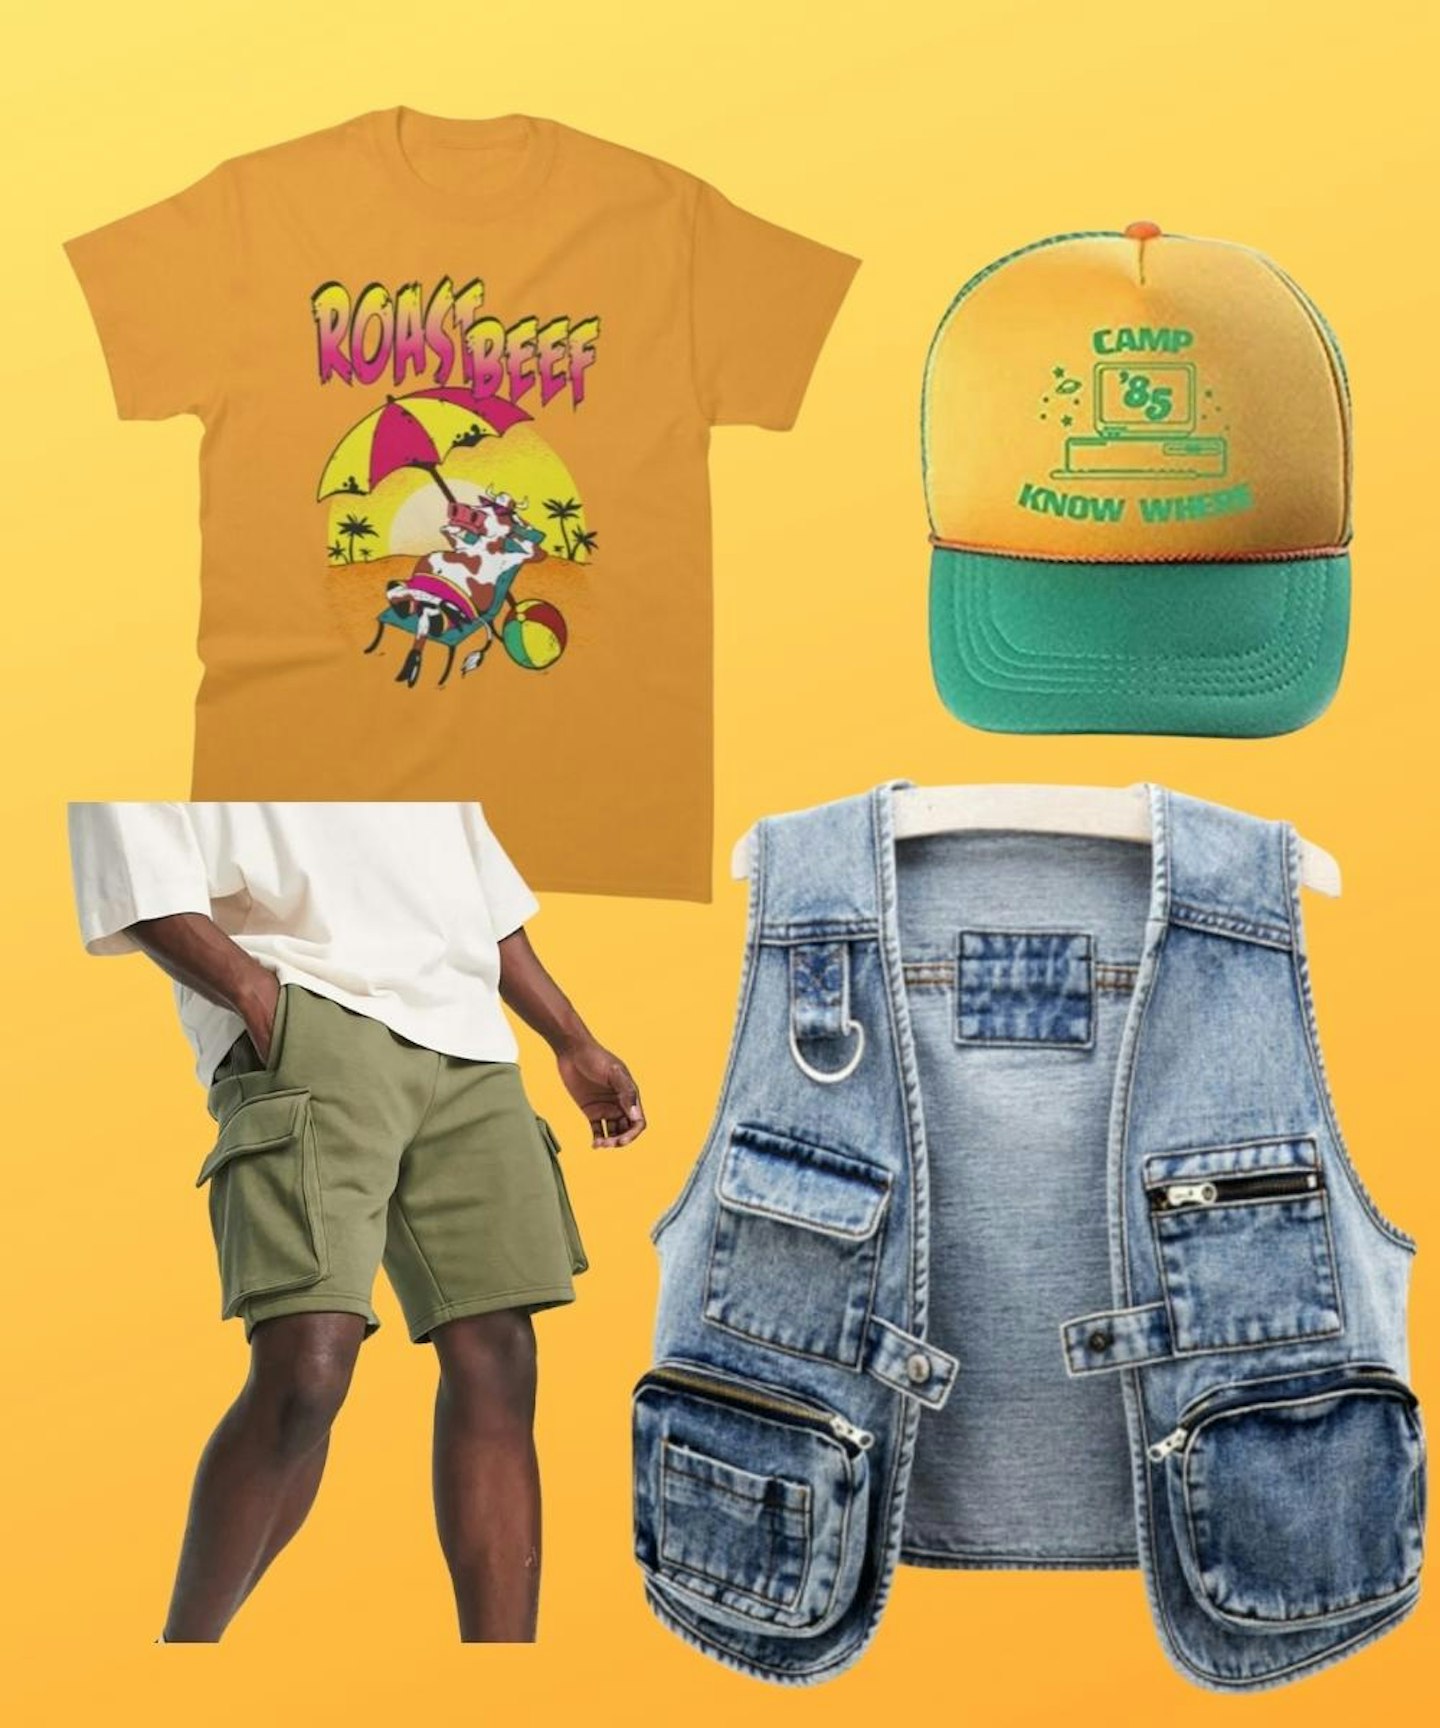 Stranger T Shirt Dustin Cosplay Costume Short Sleeve Eleven Top Tee  Baseball Hat Camp Know Where Green Yellow Cap